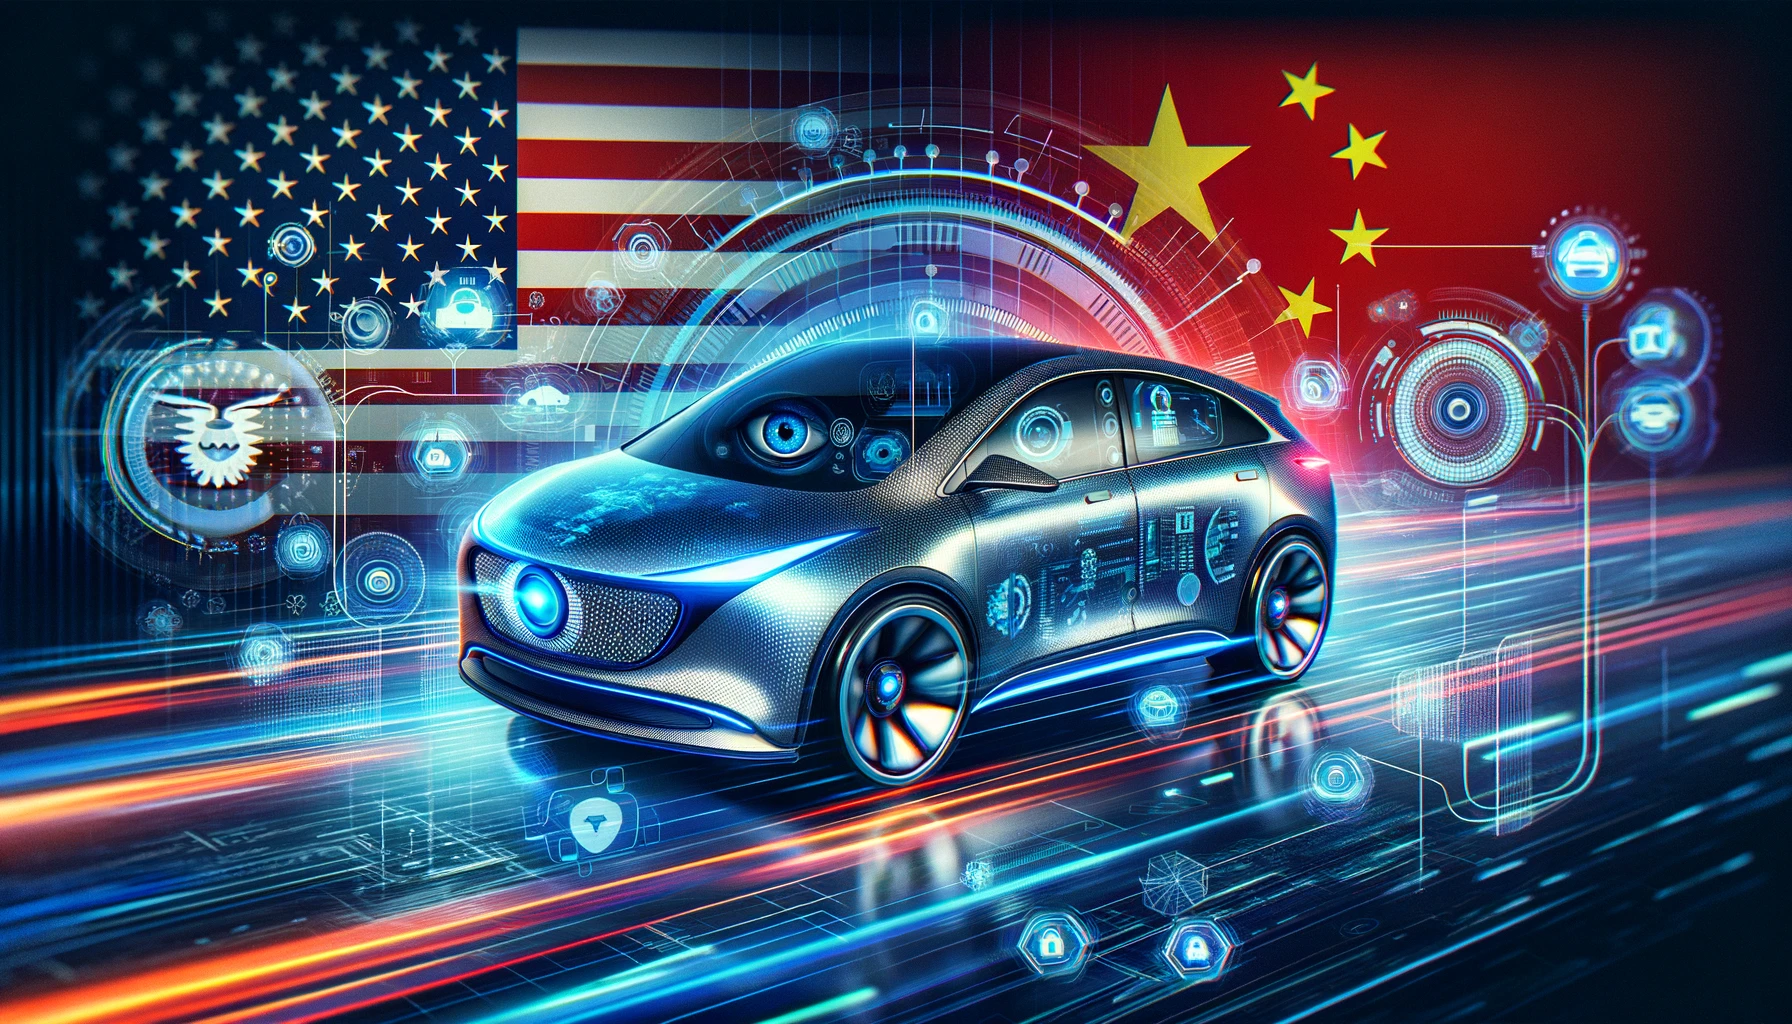 Banner depicting a contemporary smart car against a backdrop of subtly integrated US and Chinese flags, highlighting the geopolitical discussion on restrictions due to surveillance concerns in the smart car industry.